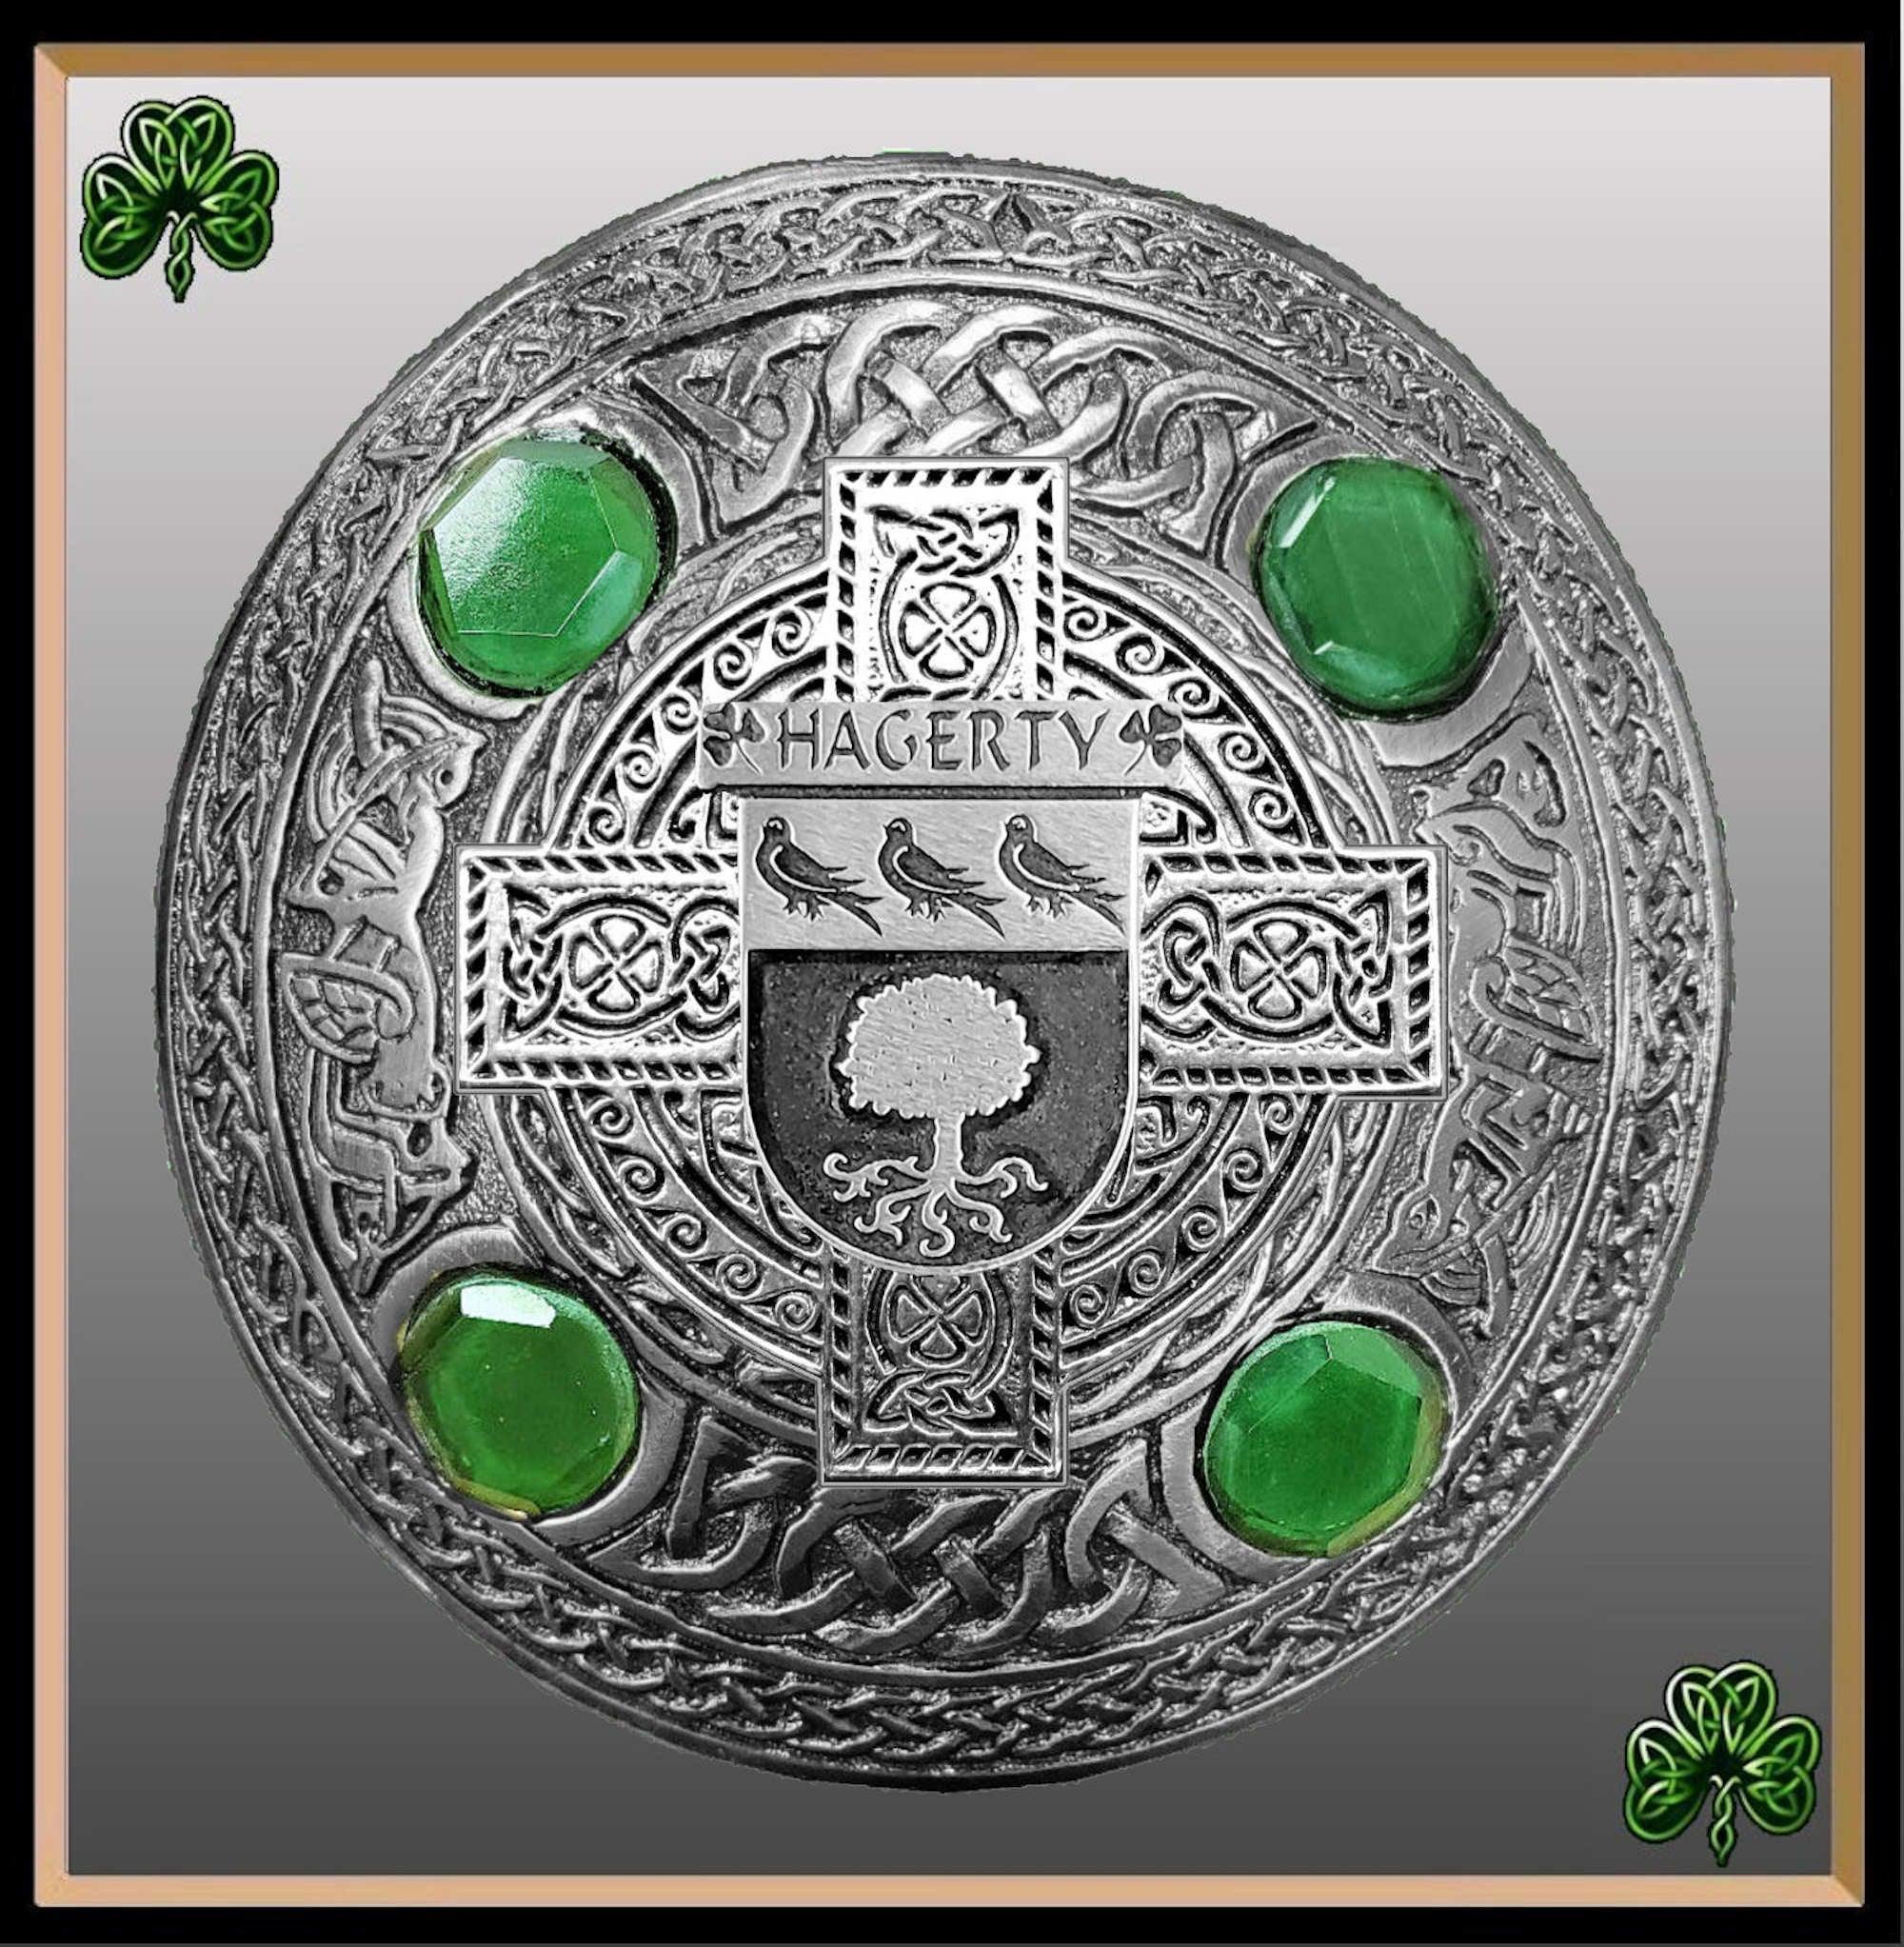 Hagerty Irish Coat of Arms Celtic Cross Plaid Brooch with Green Stones